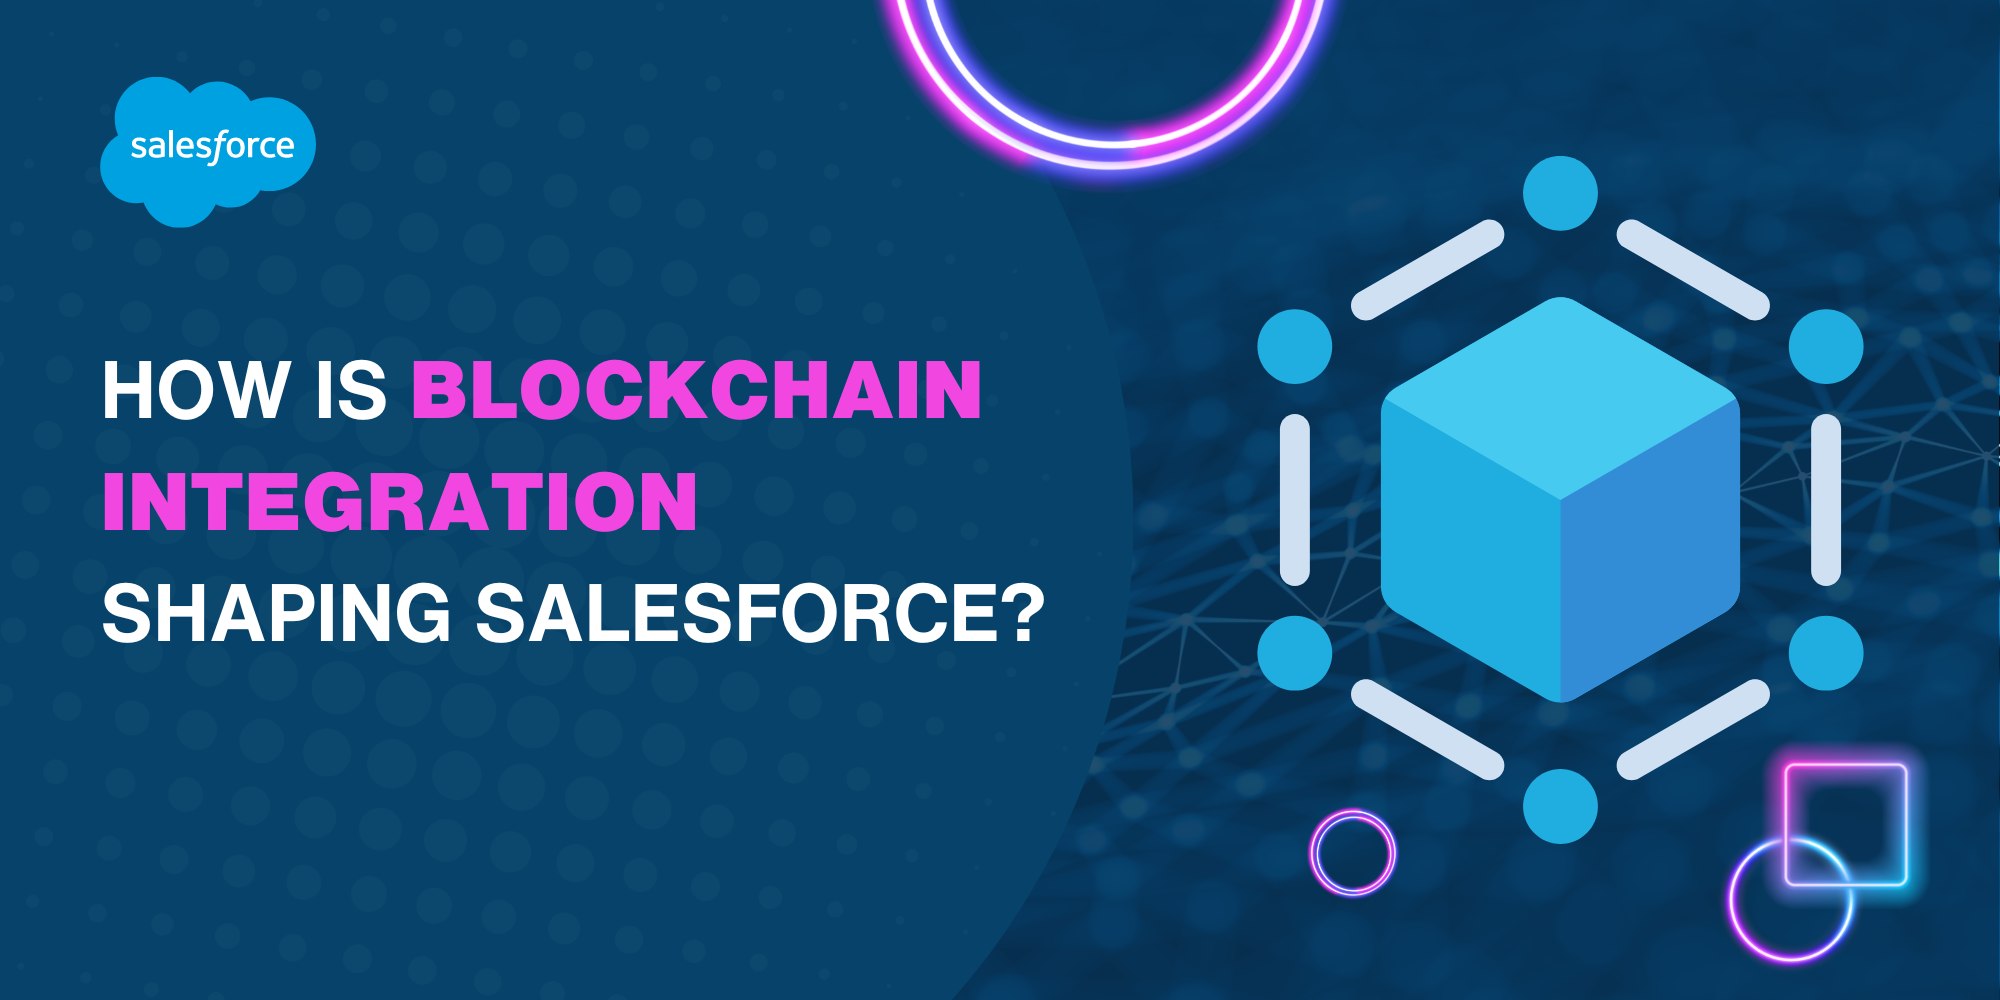 How is Blockchain Integration Shaping Salesforce?